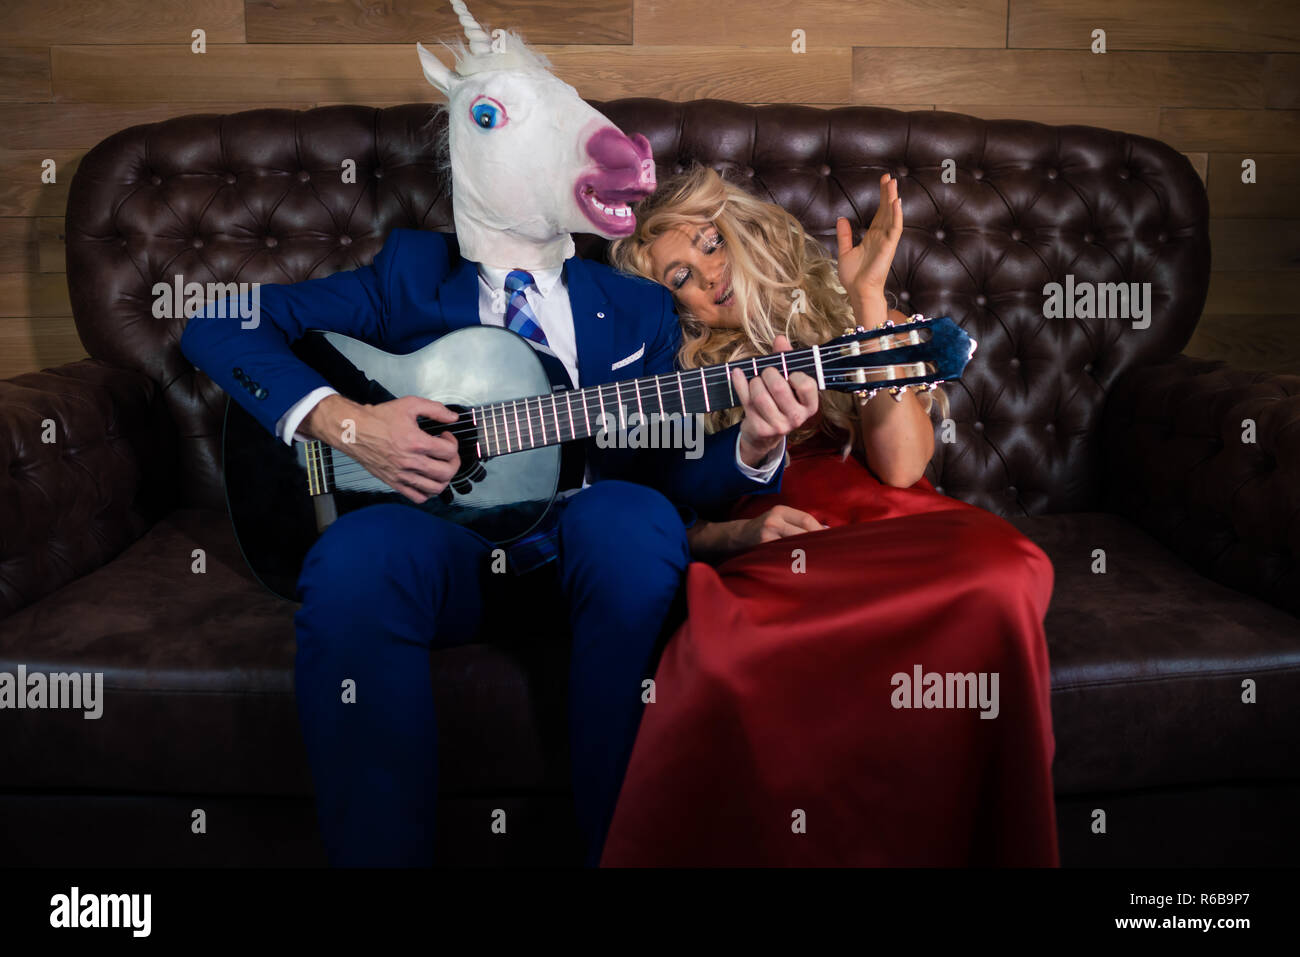 Man in suit and mask playing music on guitar for pretty girl in red dress. Unusual couple on leather sofa in stylish room. Unicorn with girlfriend Stock Photo